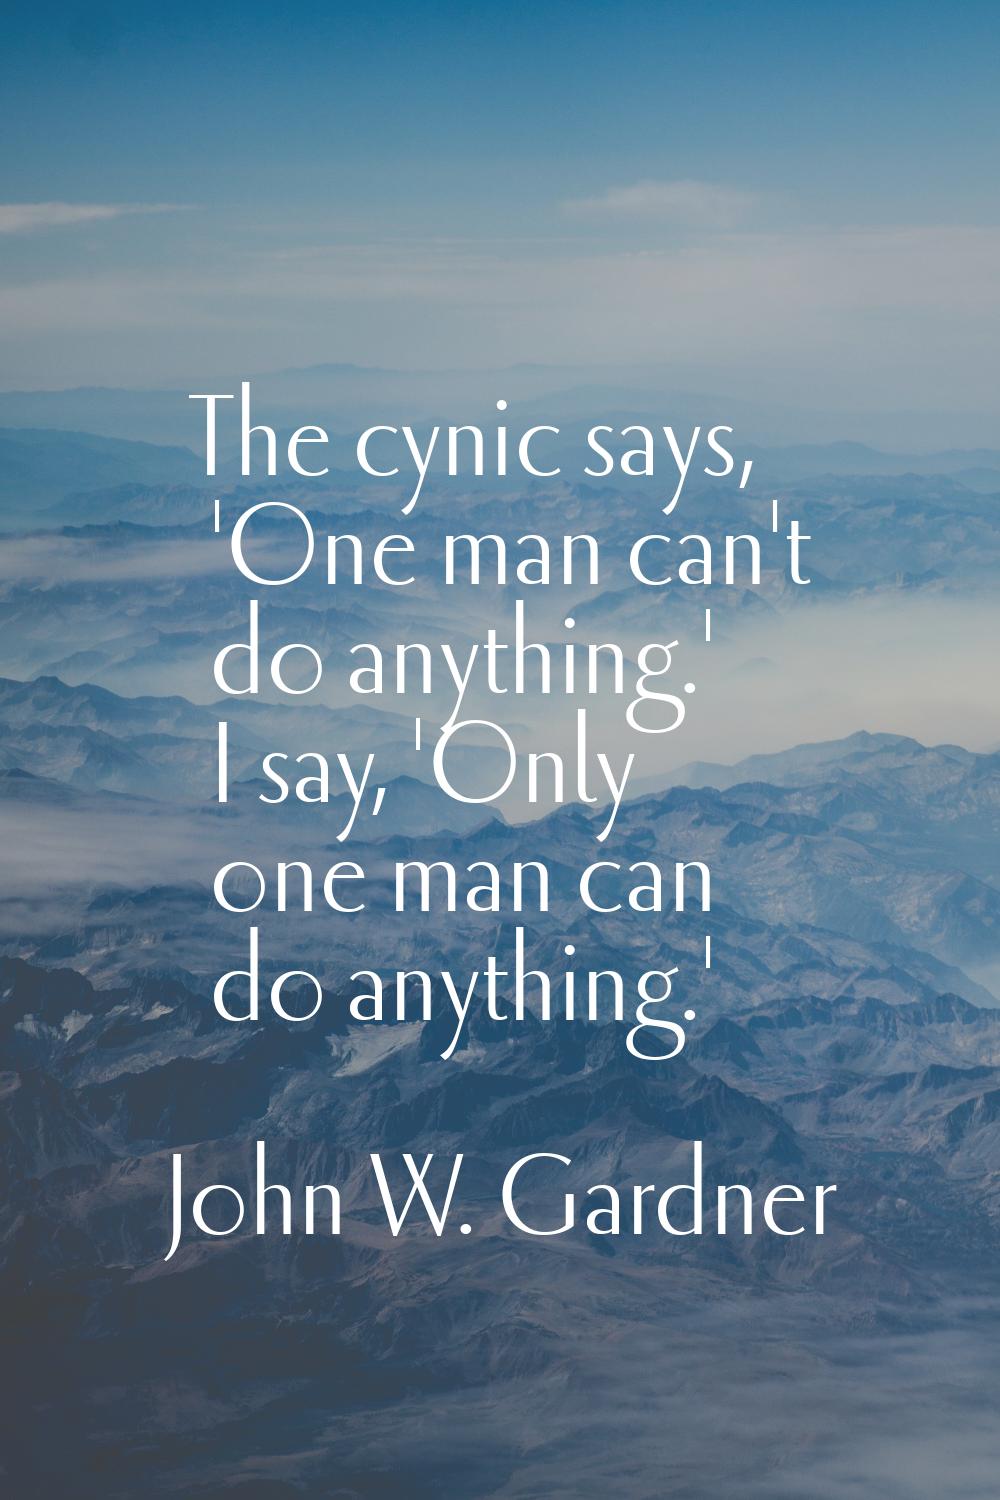 The cynic says, 'One man can't do anything.' I say, 'Only one man can do anything.'